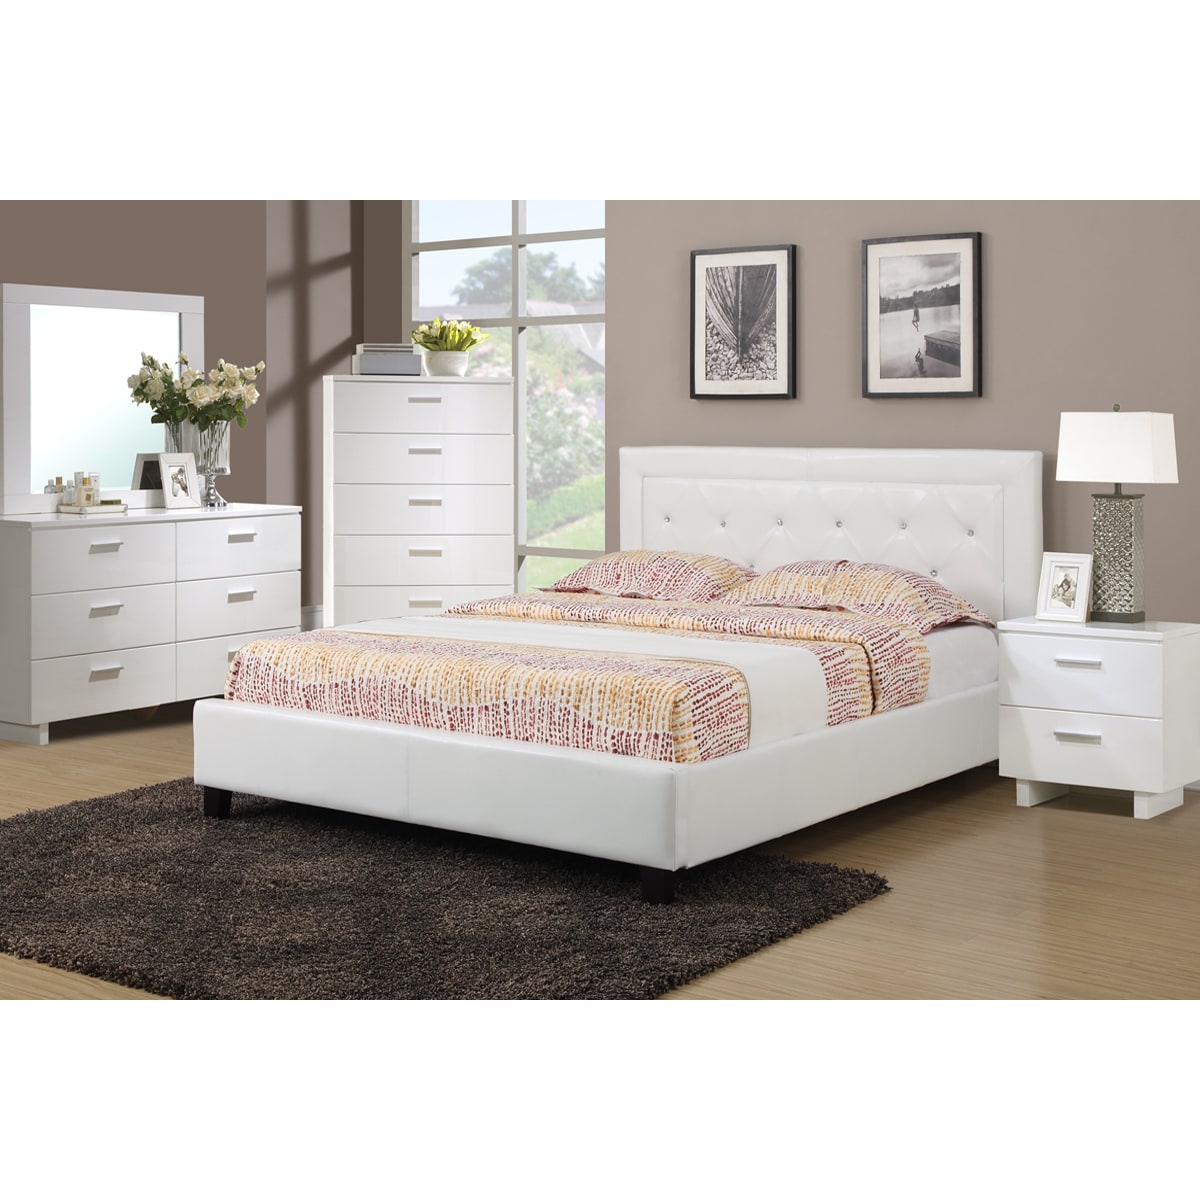 Podolinec 4 Piece Bedroom Set With Matching Nightstand Mirror And Dresser Overstock 9672186